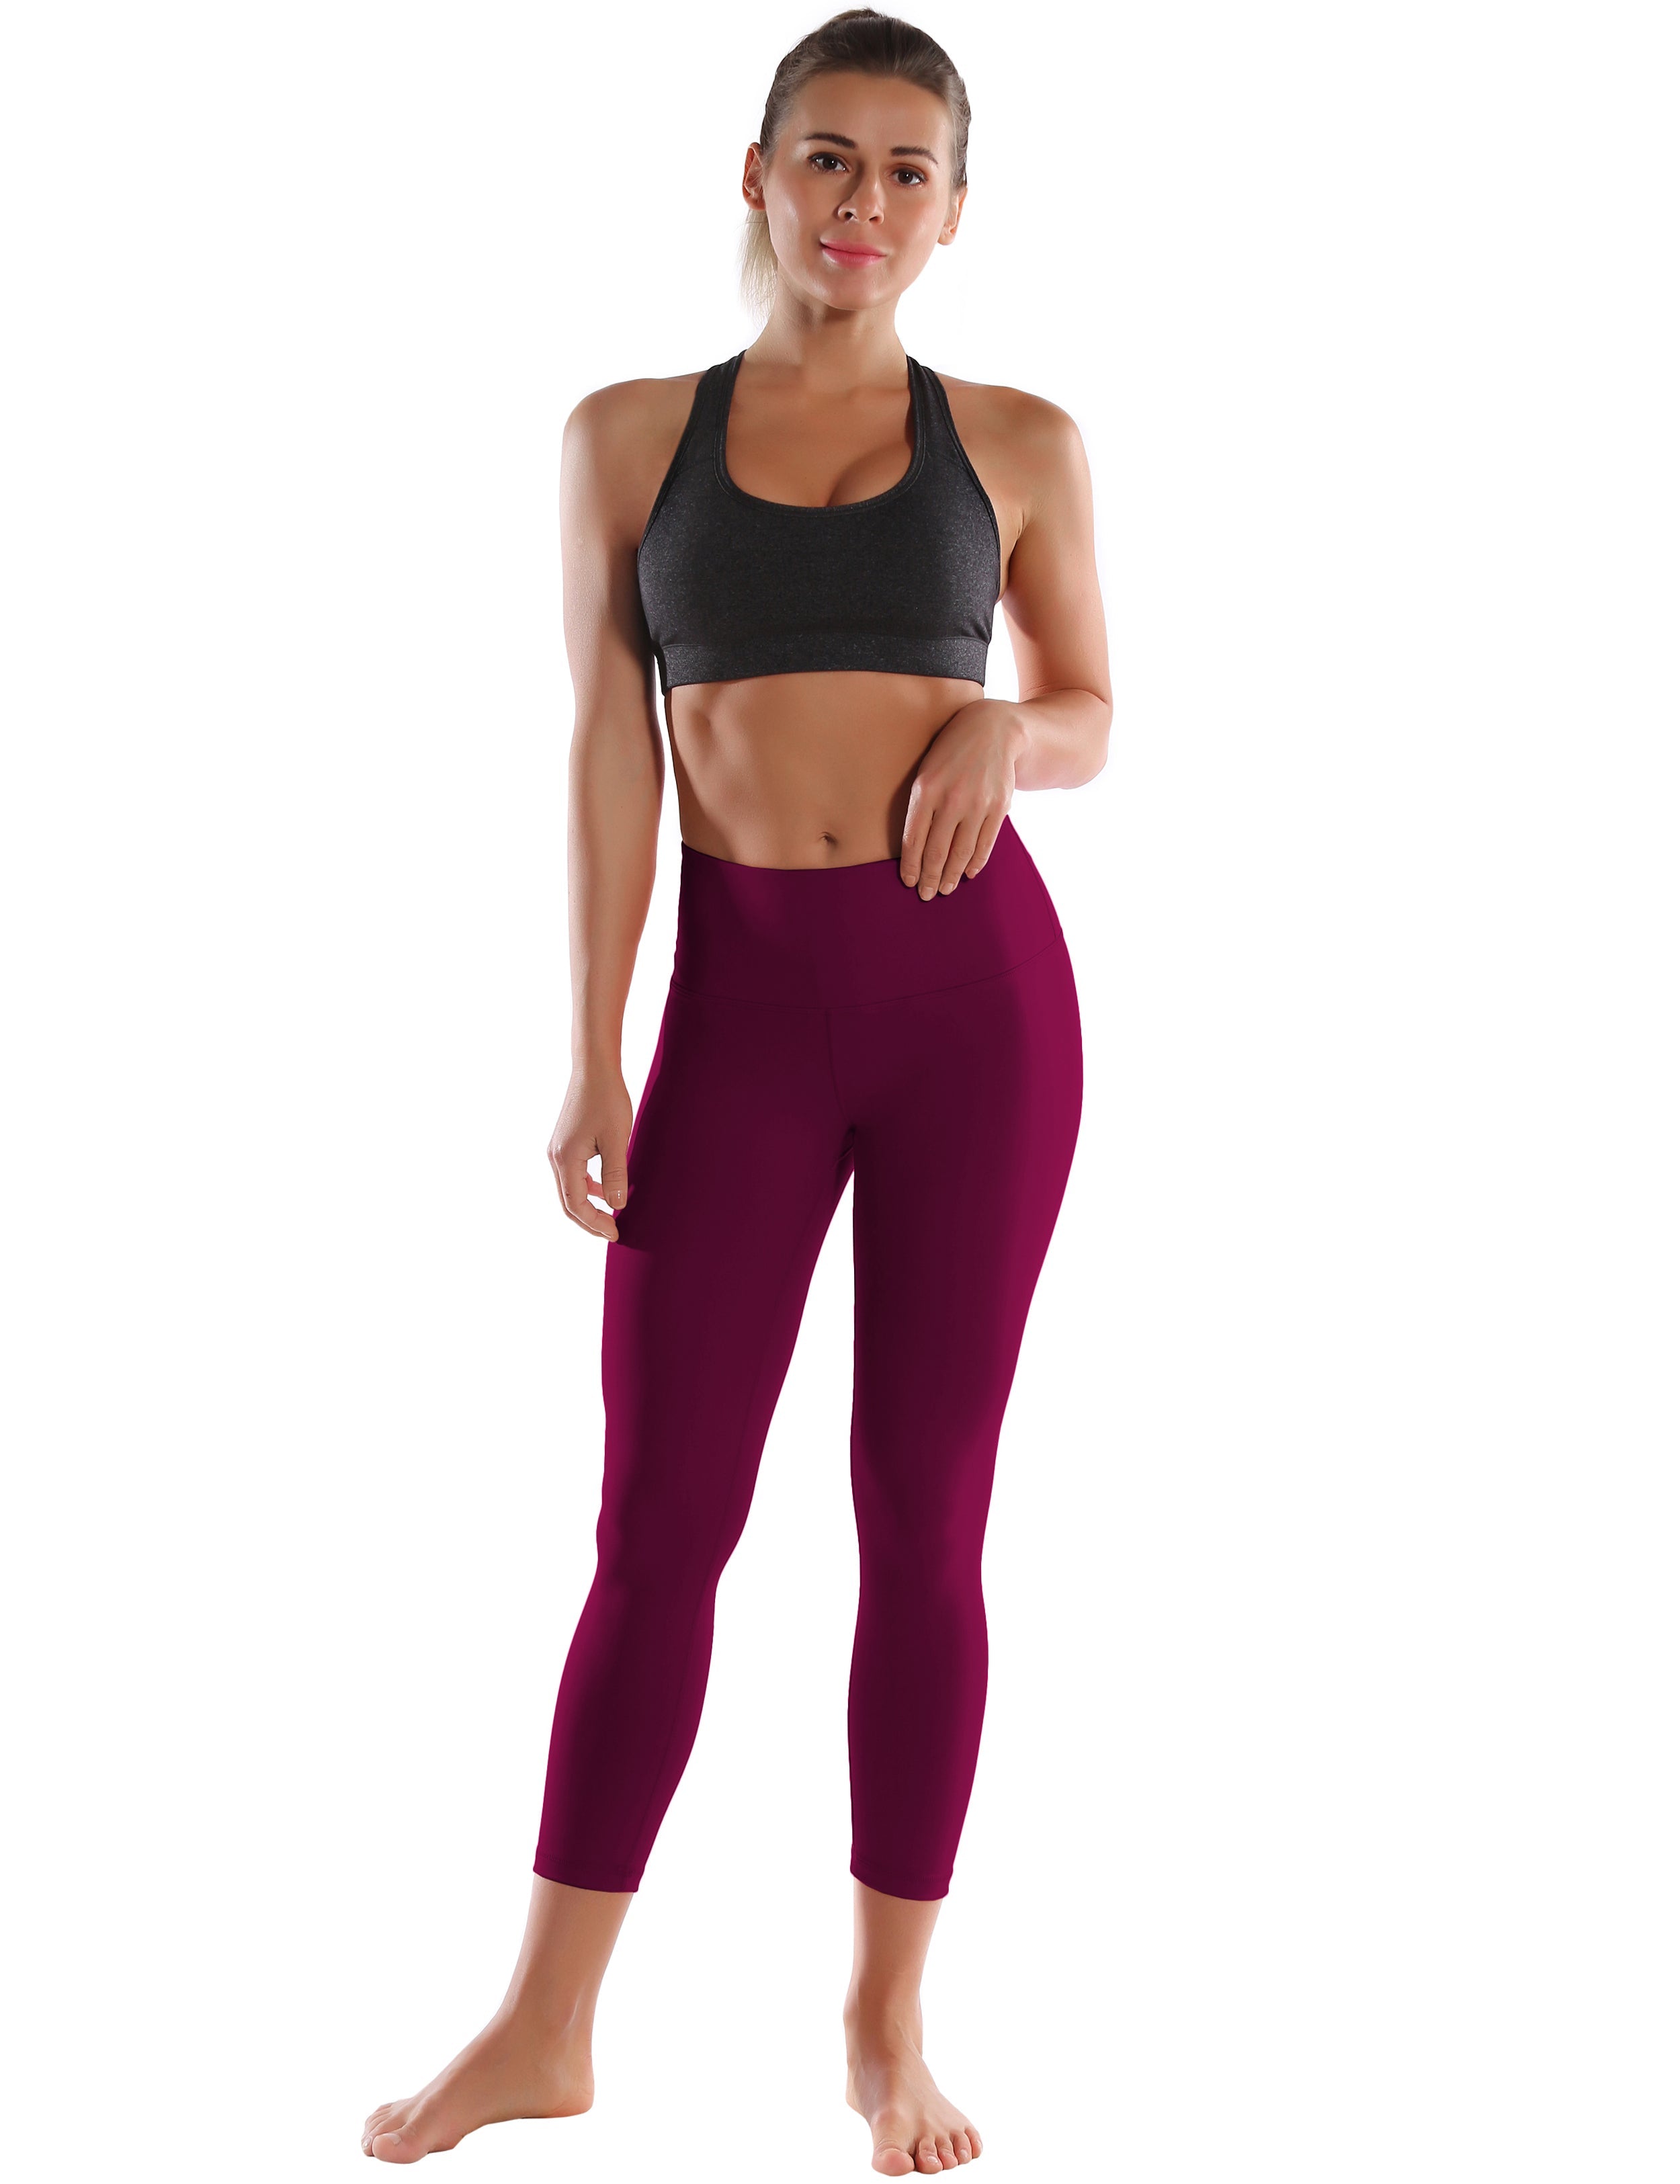 22" High Waist Crop Tight Capris grapevine 75%Nylon/25%Spandex Fabric doesn't attract lint easily 4-way stretch No see-through Moisture-wicking Tummy control Inner pocket